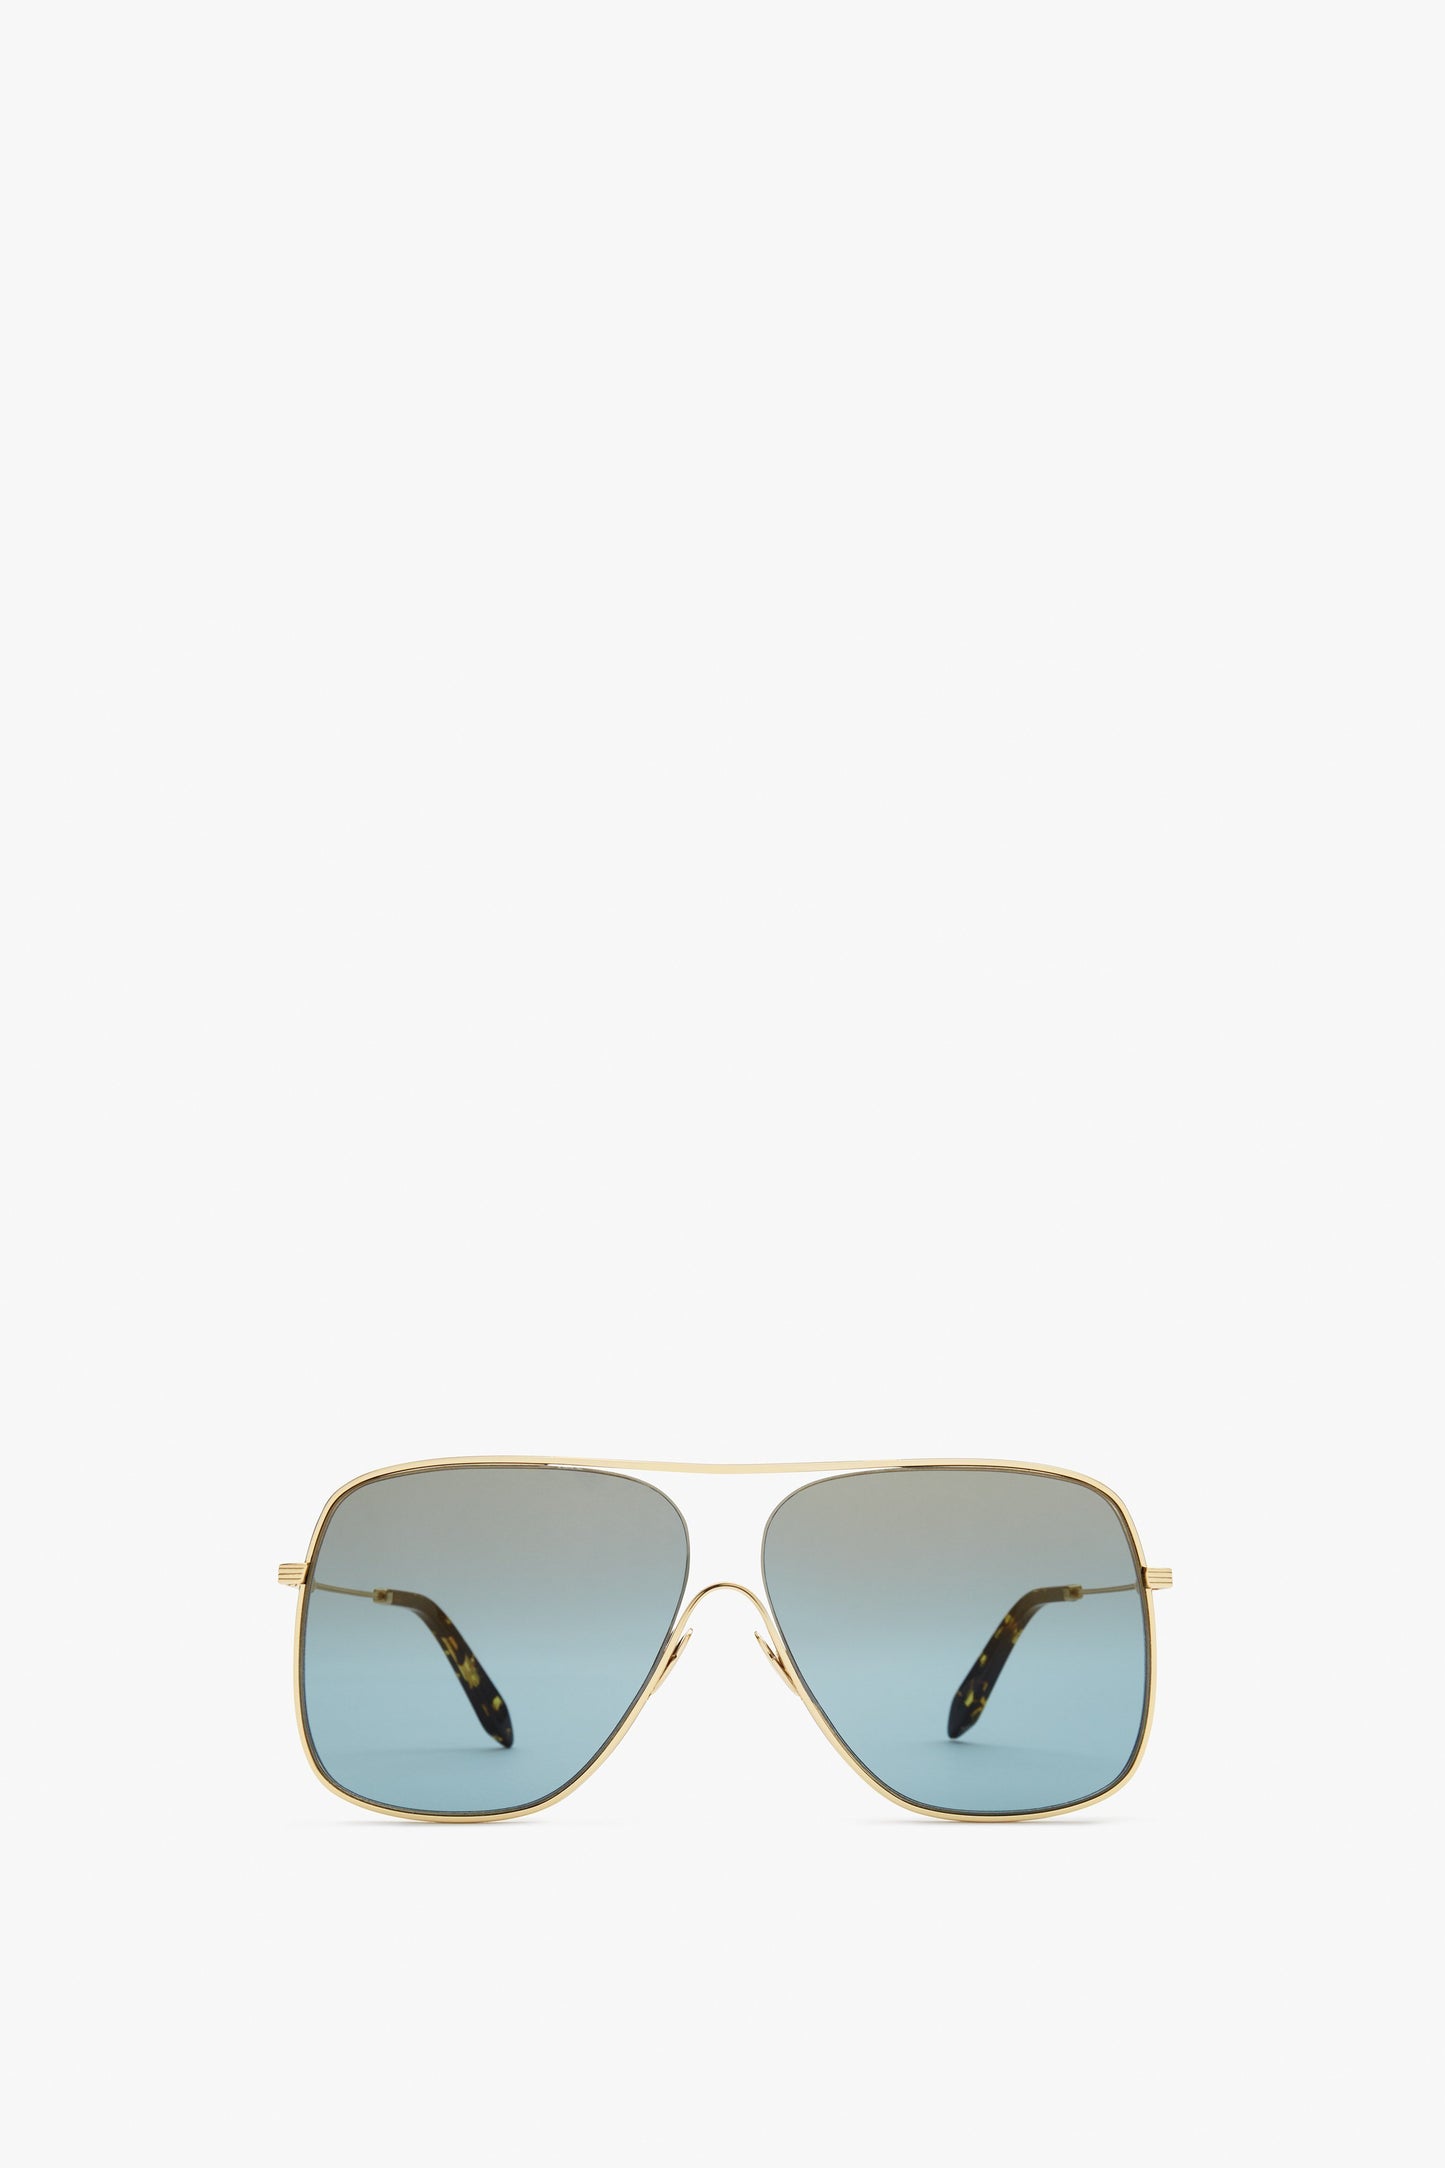 A pair of Loop Navigator in Celeste sunglasses with gold frames and gradient blue lenses on a plain white background, embodying classic Aviator style. Made in Italy, these Victoria Beckham sunglasses are the epitome of luxury and craftsmanship.